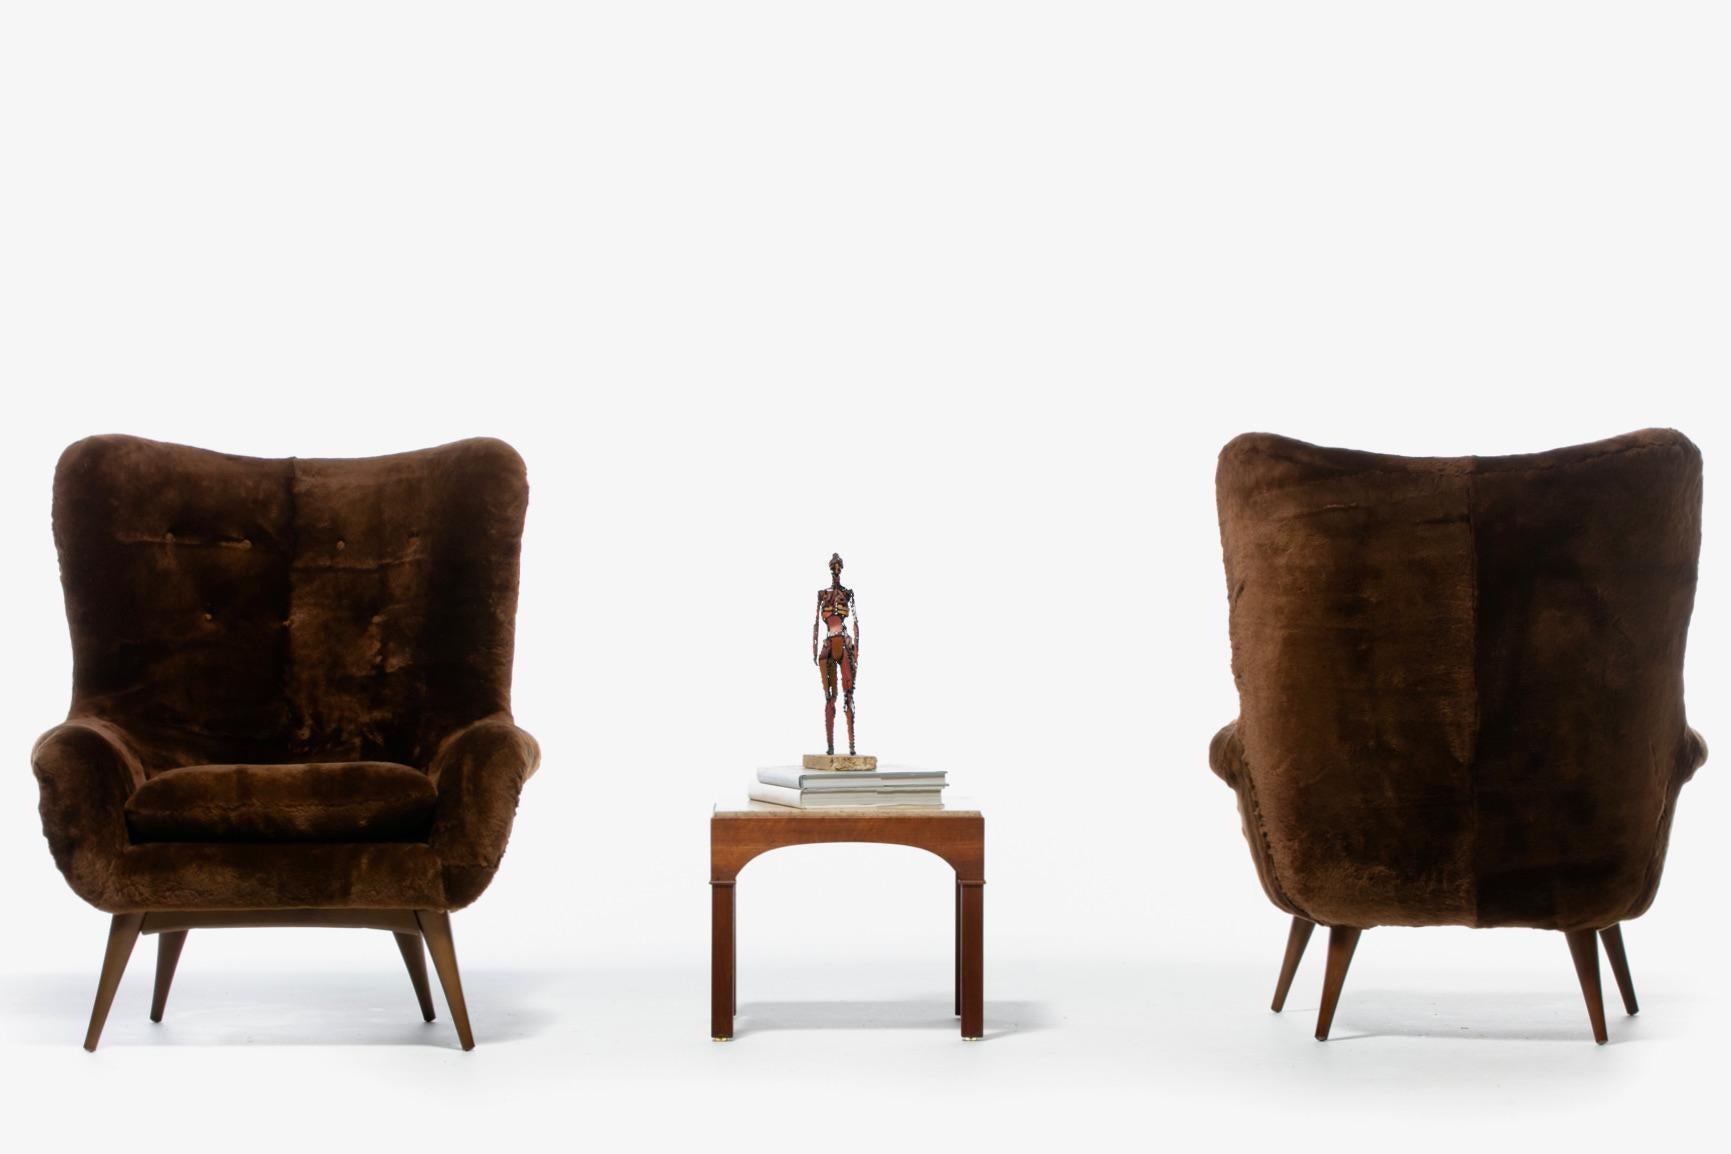 Karpen Wingback Chairs in Luxuriously Soft Milk Chocolate Shearling, circa 1950s In Good Condition For Sale In Saint Louis, MO